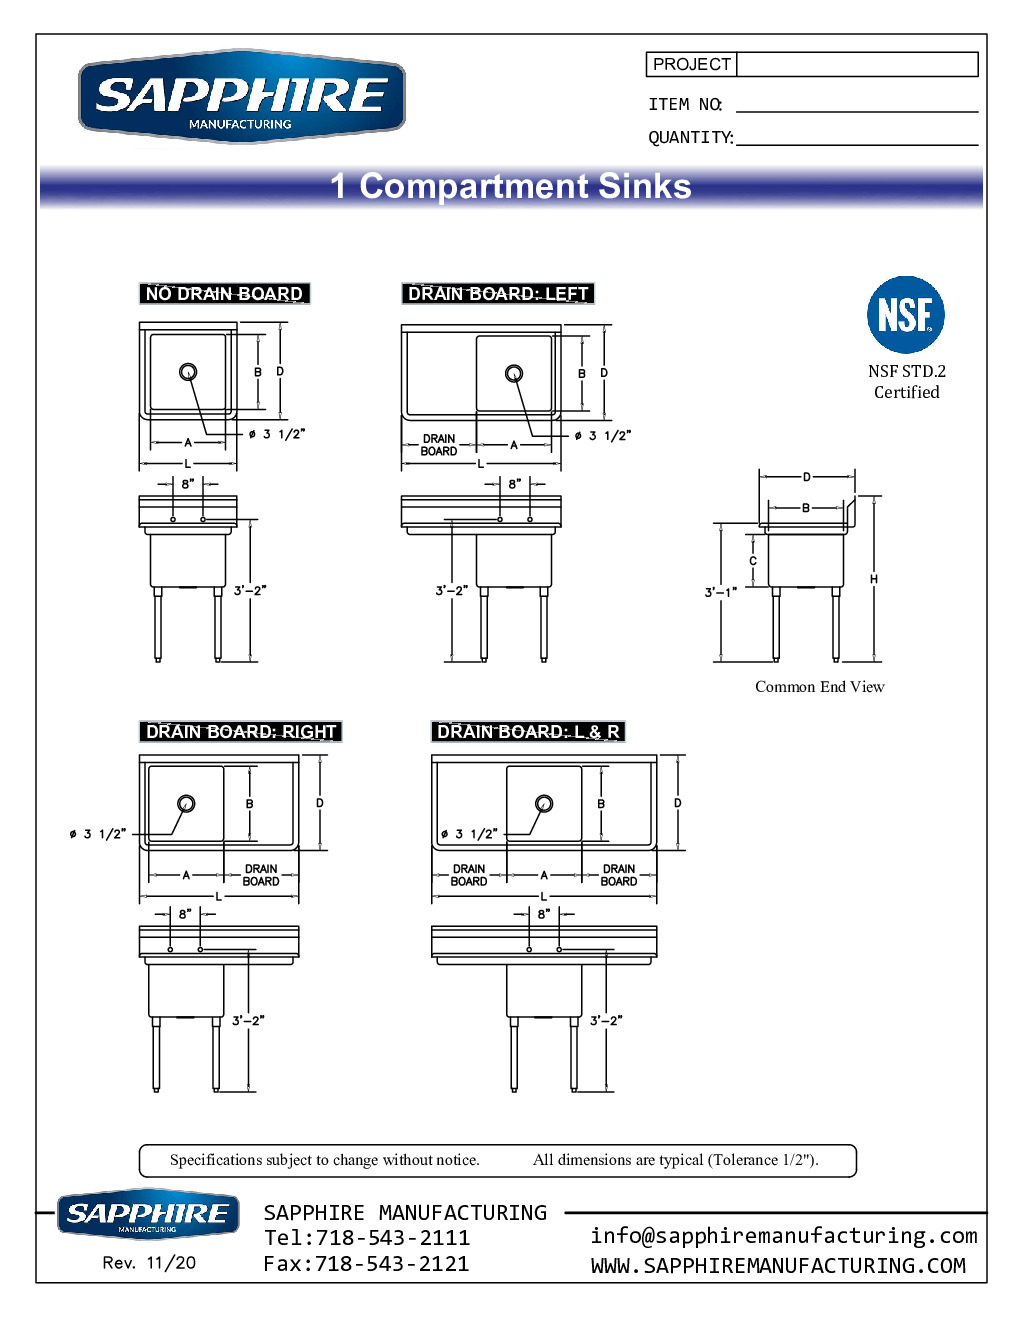 Sapphire Manufacturing SMS-1416L (1) One Compartment Sink